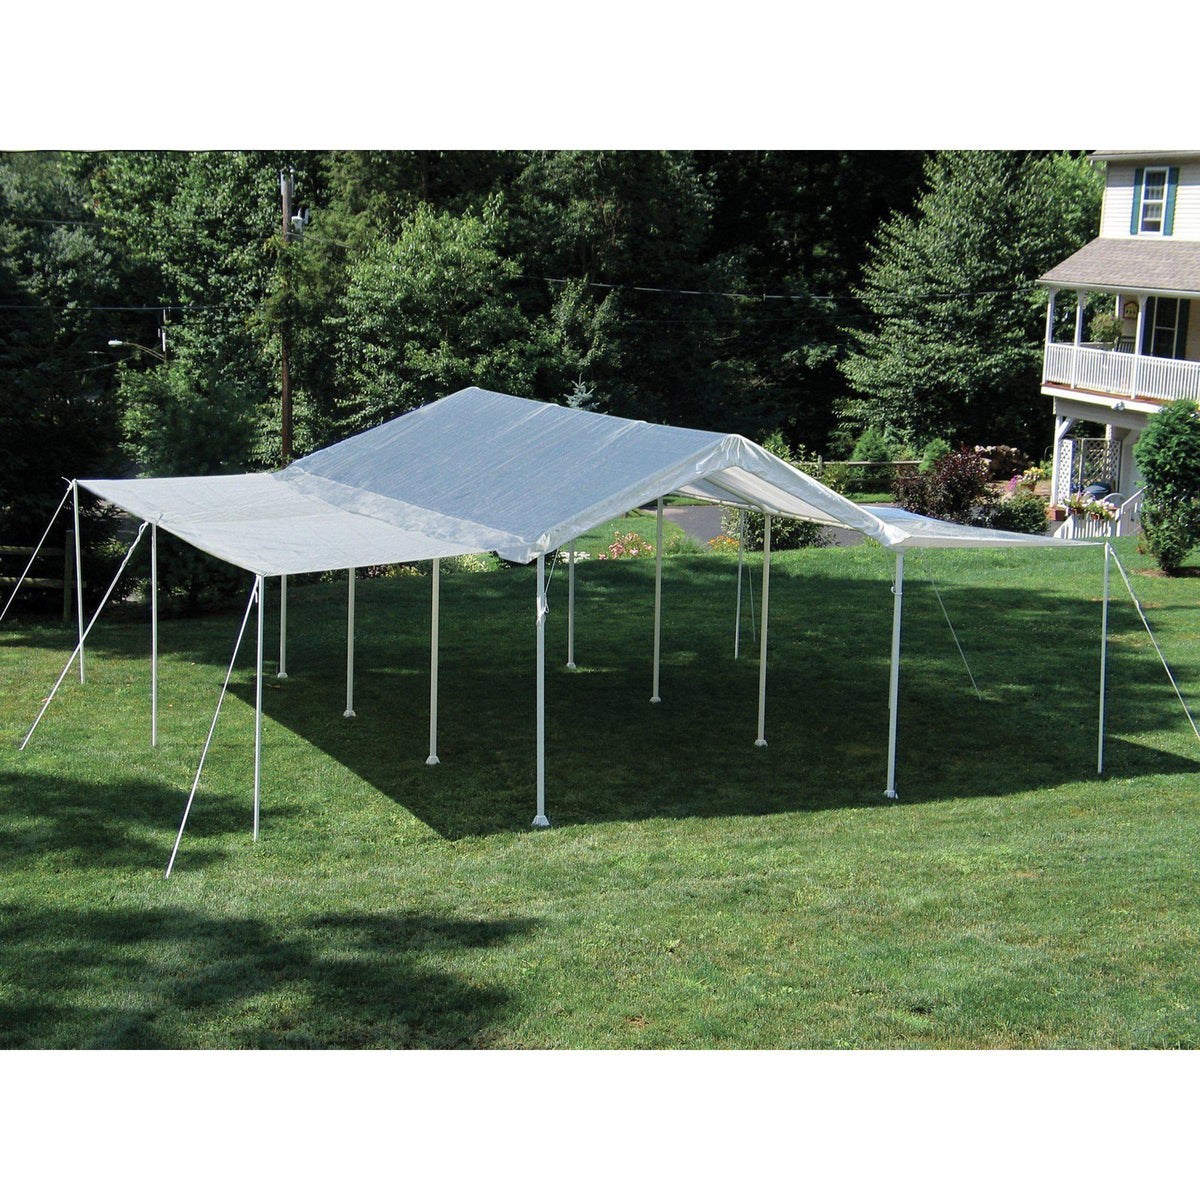 ShelterLogic MaxAP 2-in-1 Canopy with Extension Kit, White, 10 x 20 ft.